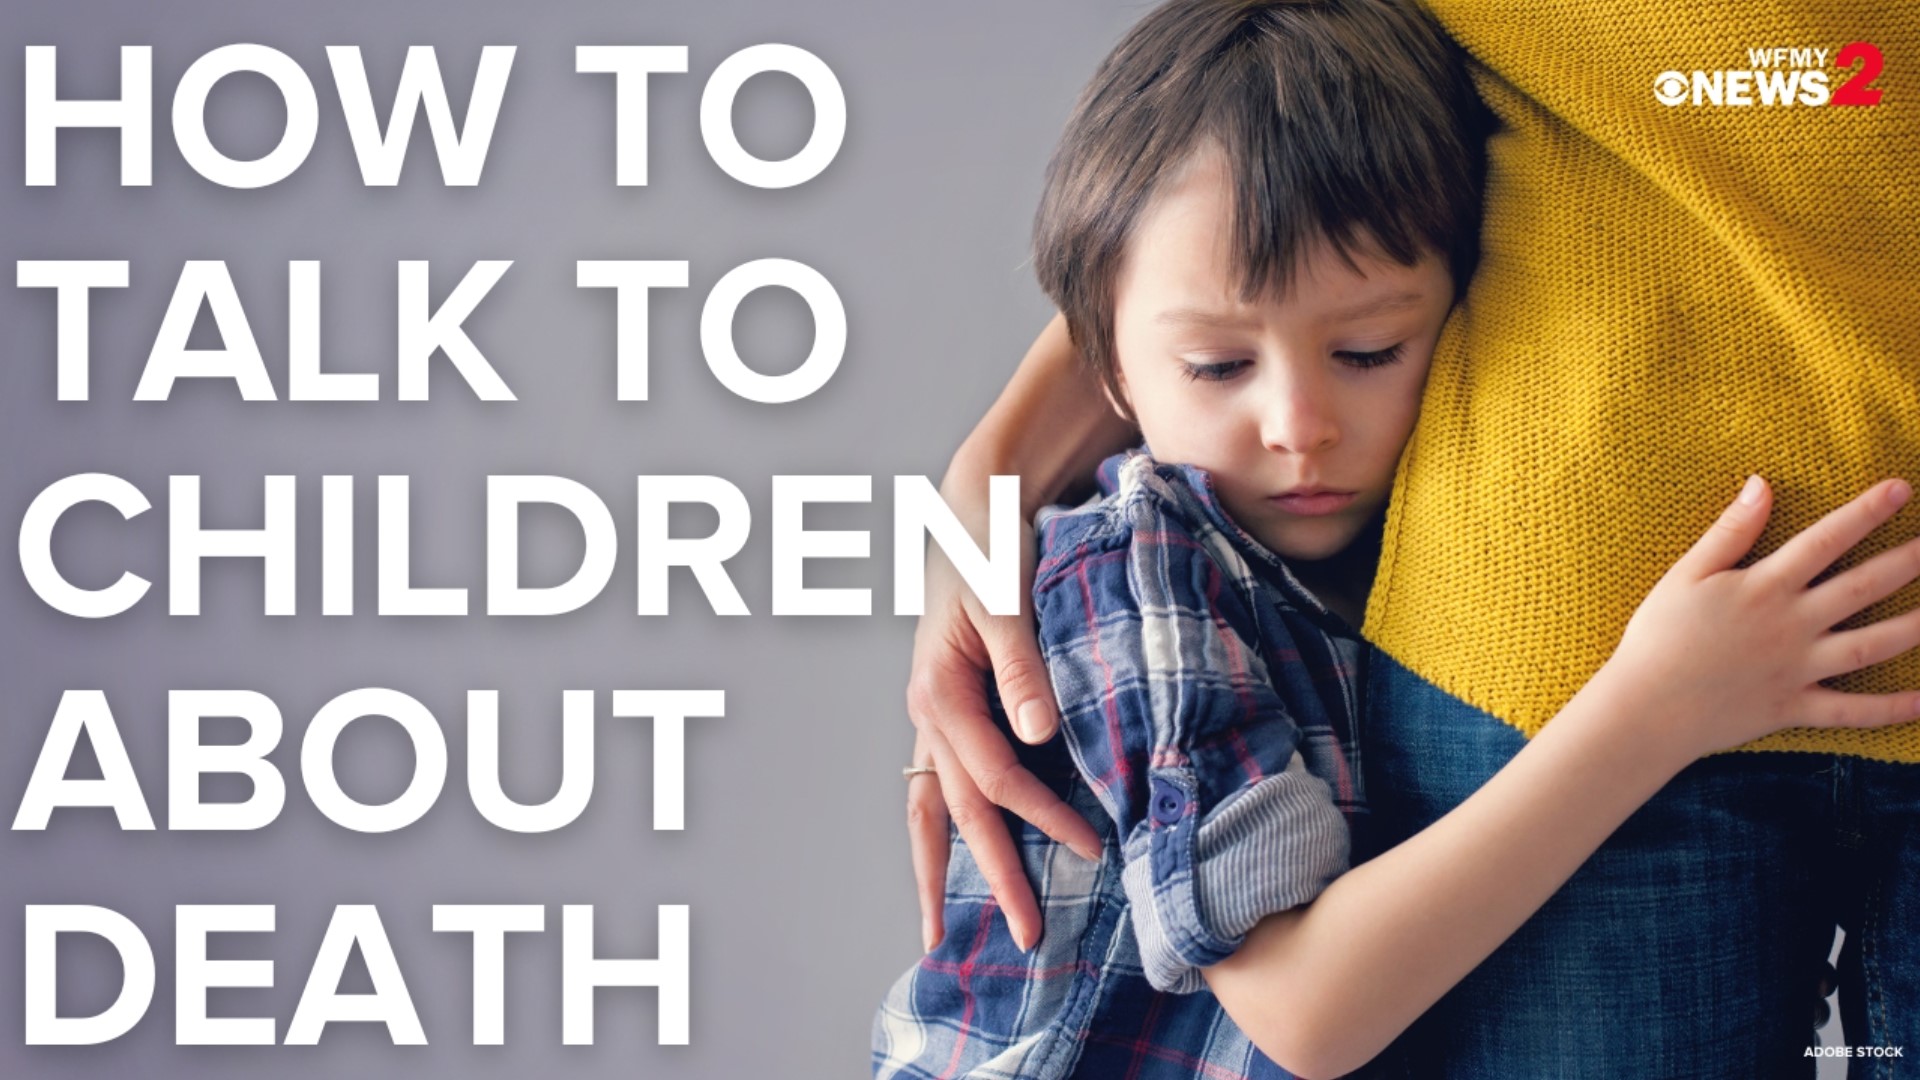 Psychology expert, Blanca Cobb, shares ways to tackle the tough conversation with children.